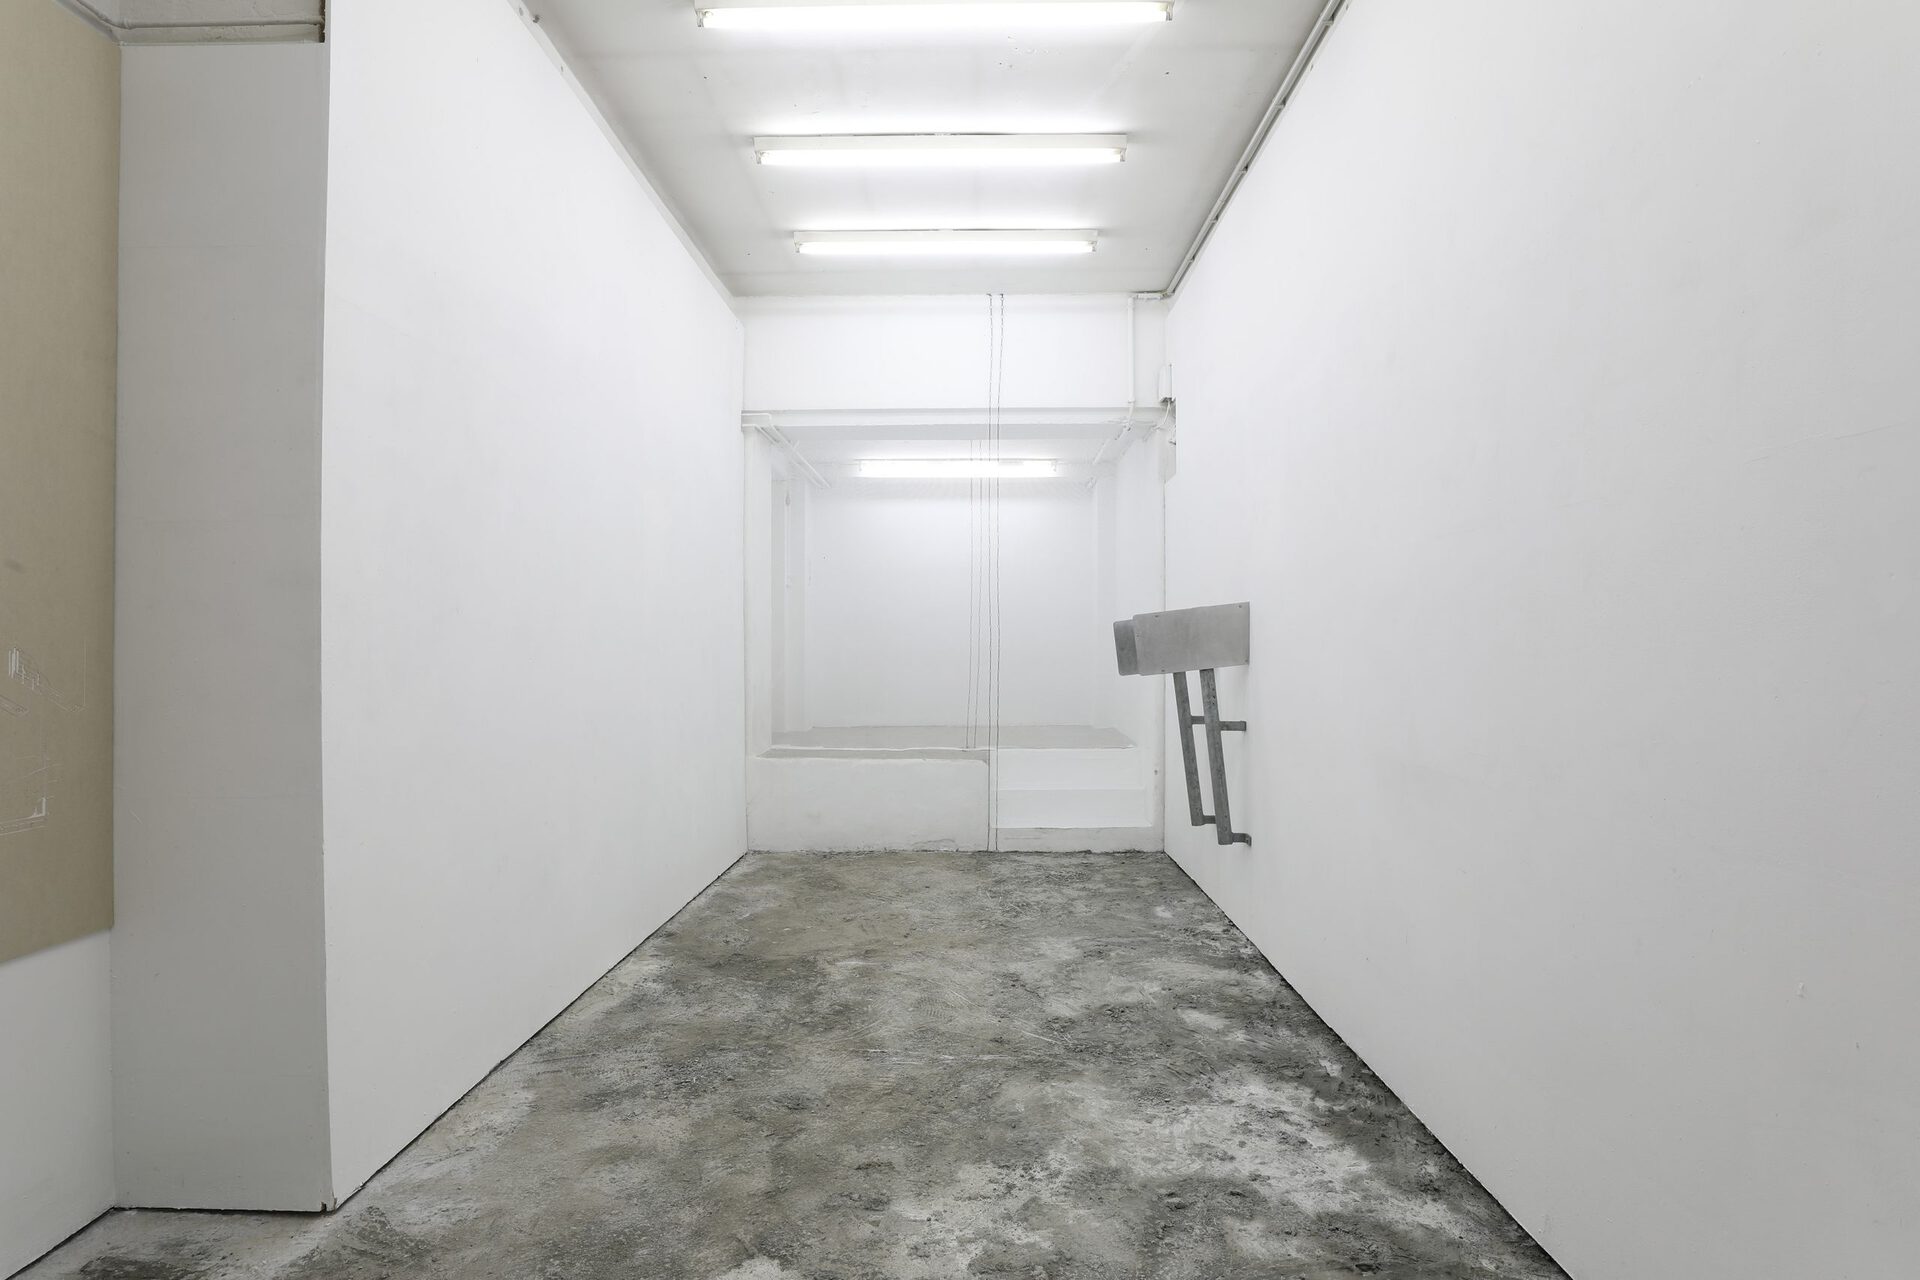 Rosario Aninat and Simon Shim-Sutcliffe, A66, Concrete, Scaffolding, Highway Mile Markers, Truck Mud Guard, White Tape, and Gips Board, Dimensions Variable